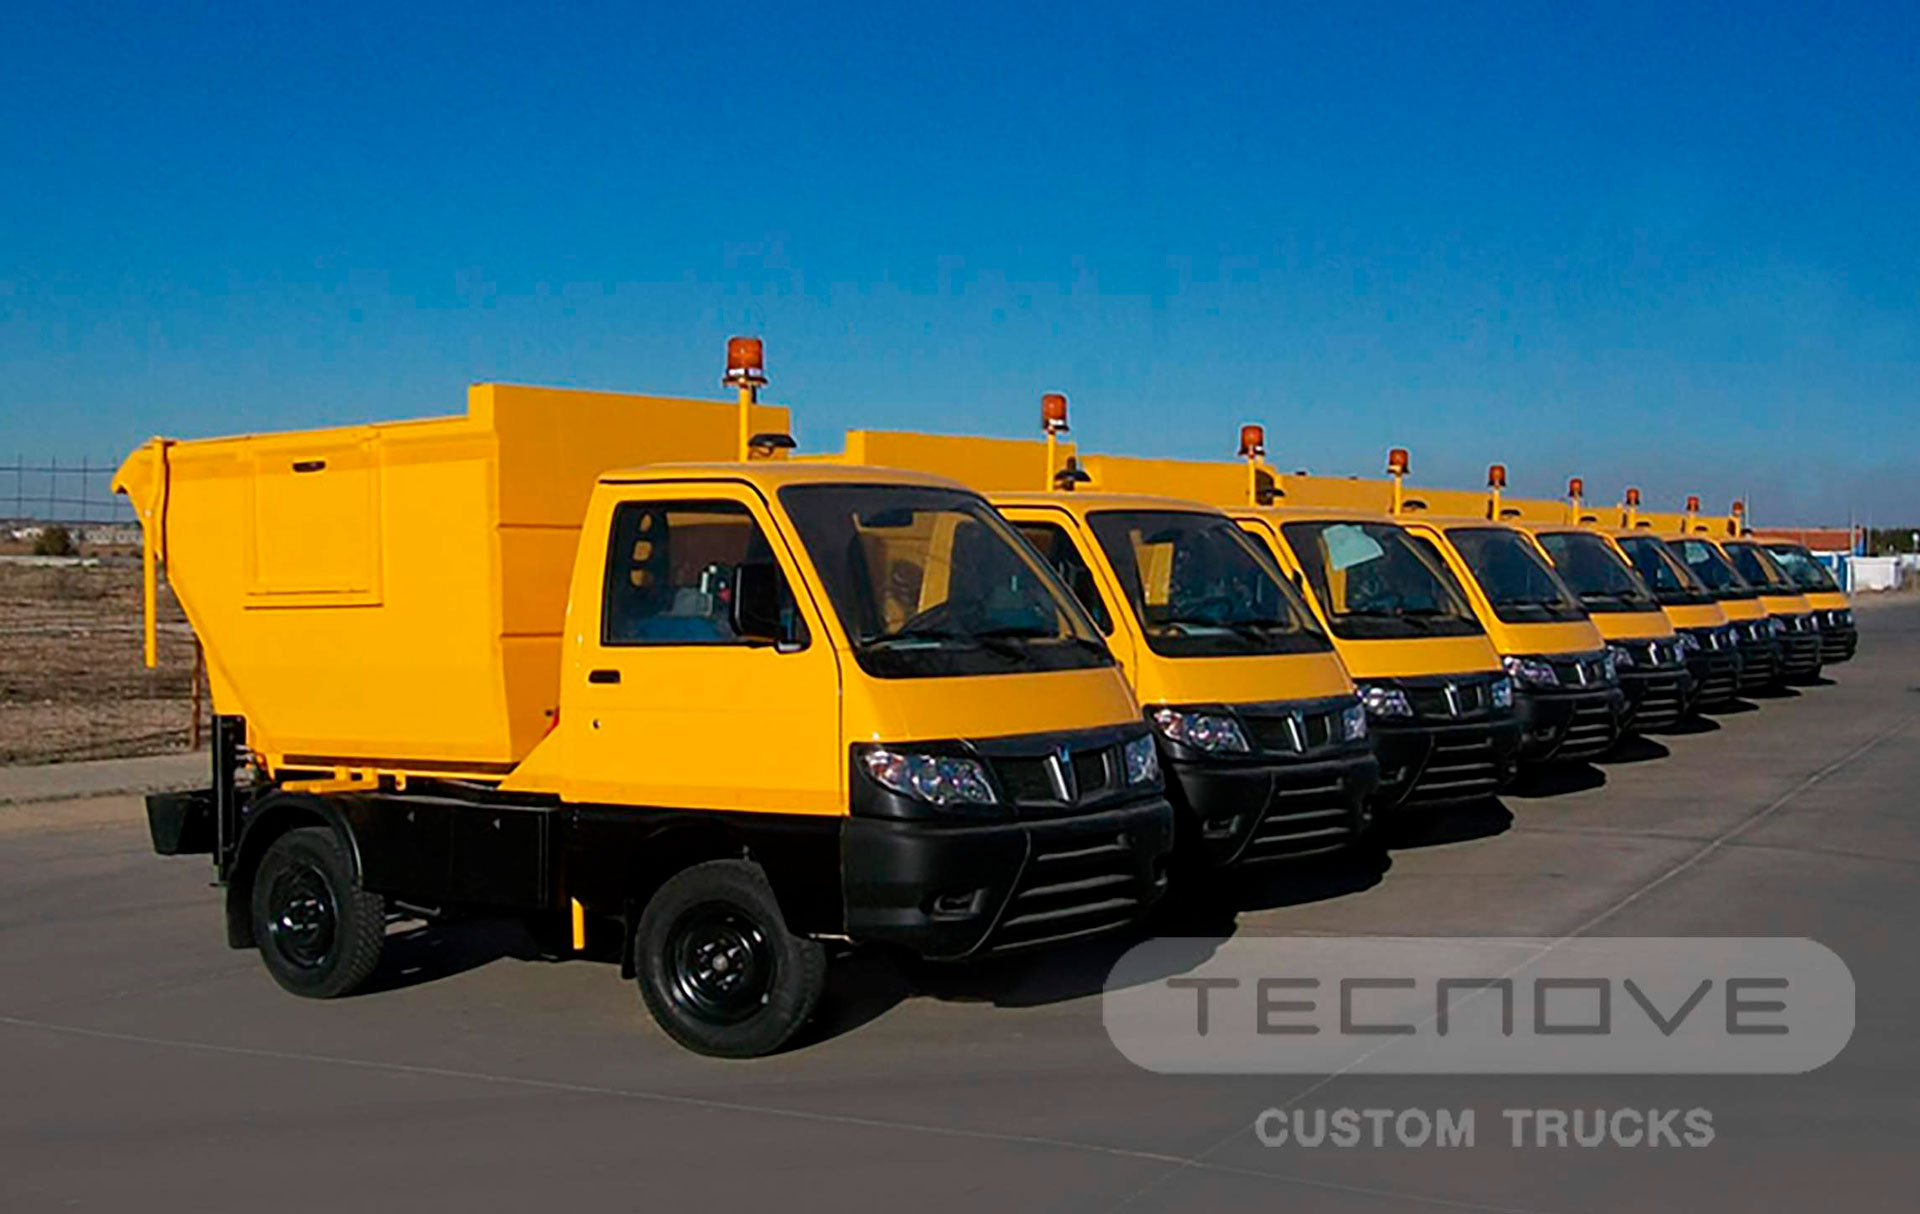 Small Urban Cleaning Vehicles